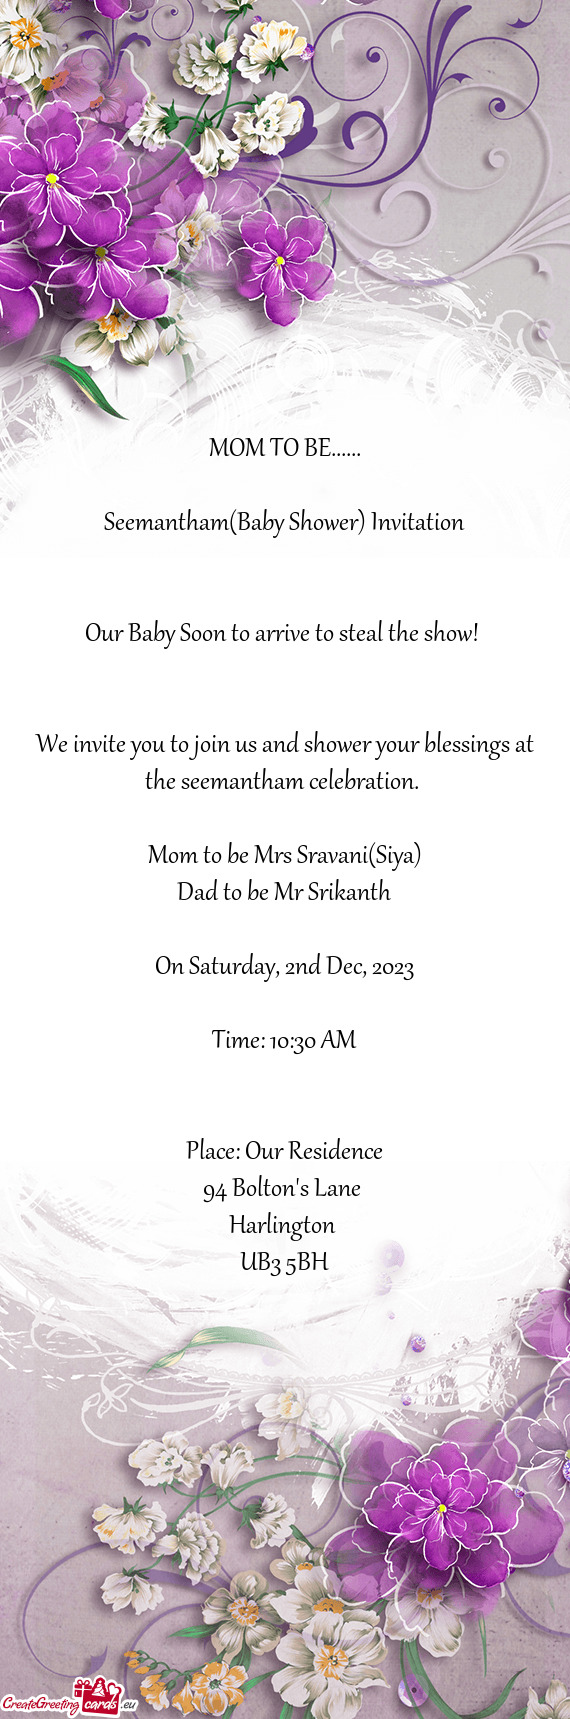 We invite you to join us and shower your blessings at the seemantham celebration